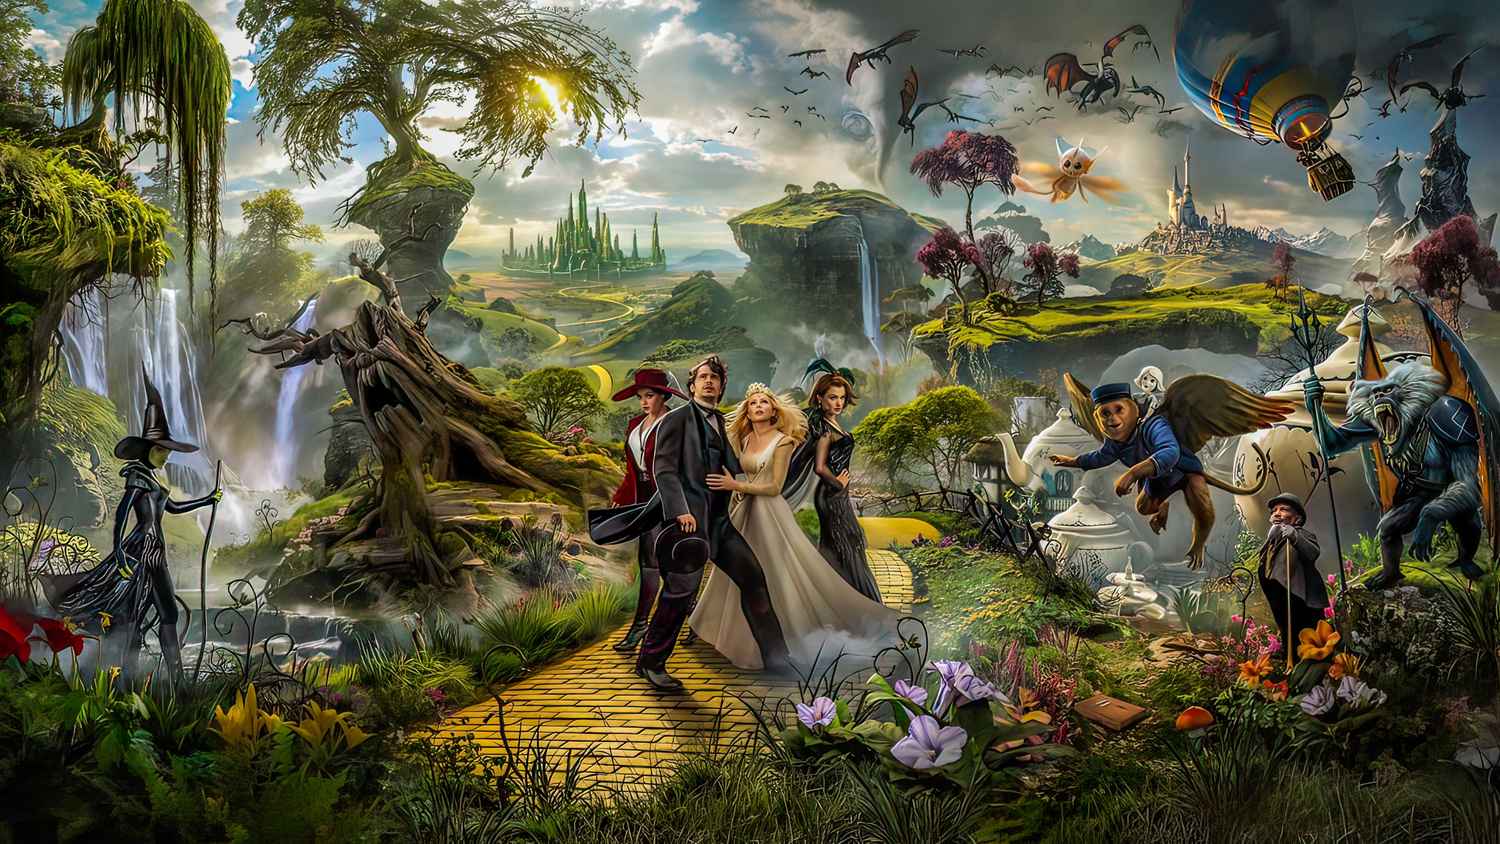 oz the great and powerful full movie tamil dubbed